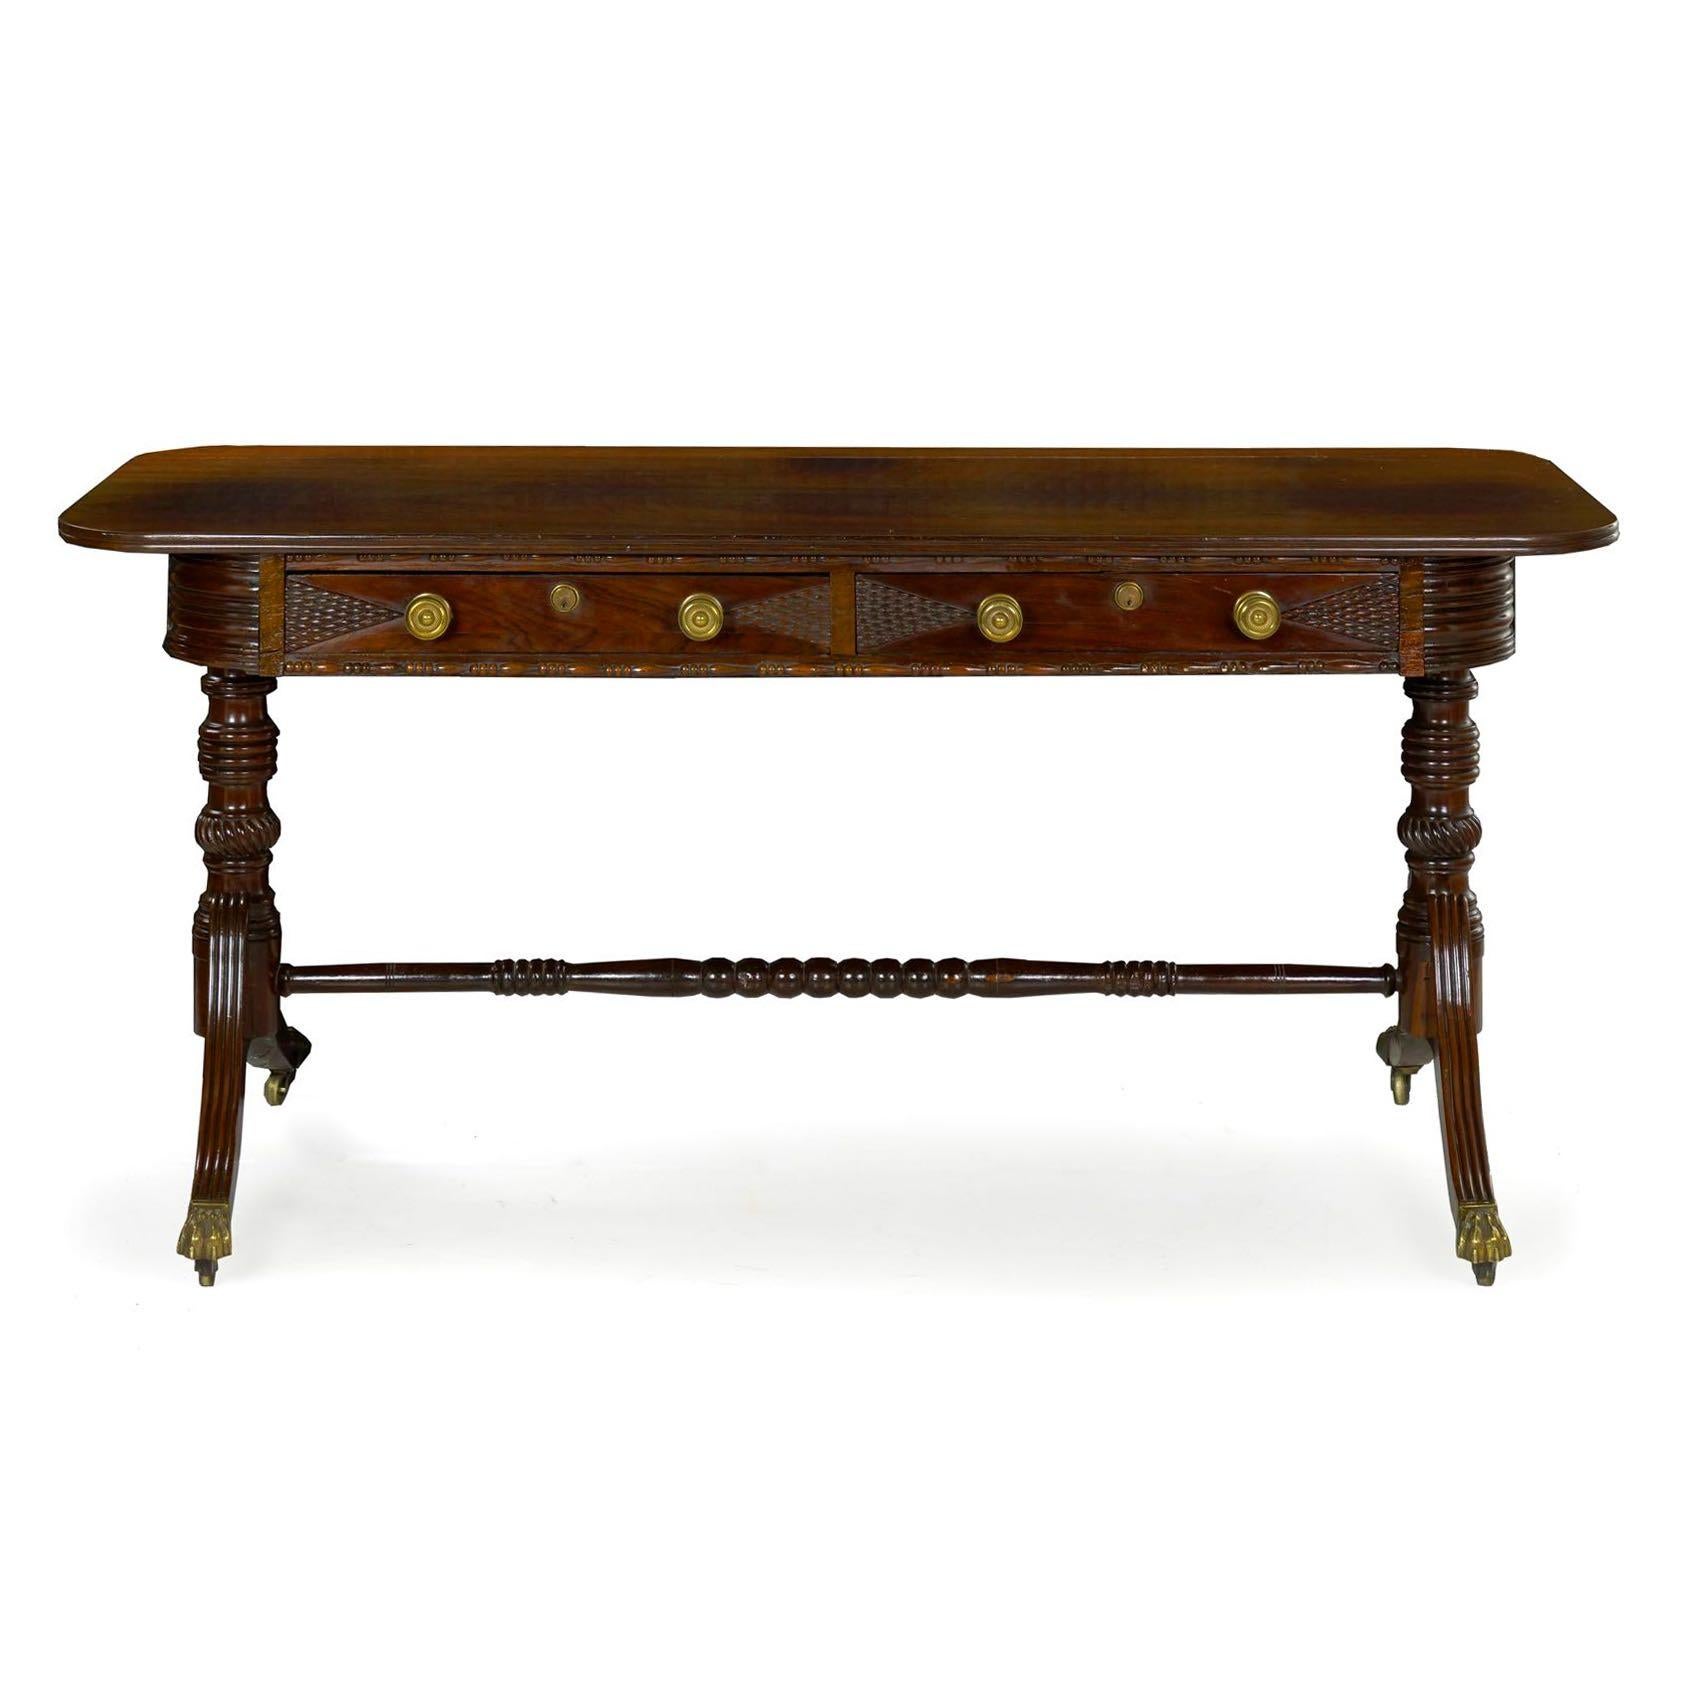 A handsome Anglo-Indian Regency writing table, it is executed with solid Brazilian rosewood planks, a wood now nearly extinct and rare in this vibrant and chaotic grain. The dense grain takes a French polish beautifully with a rich shellac surface